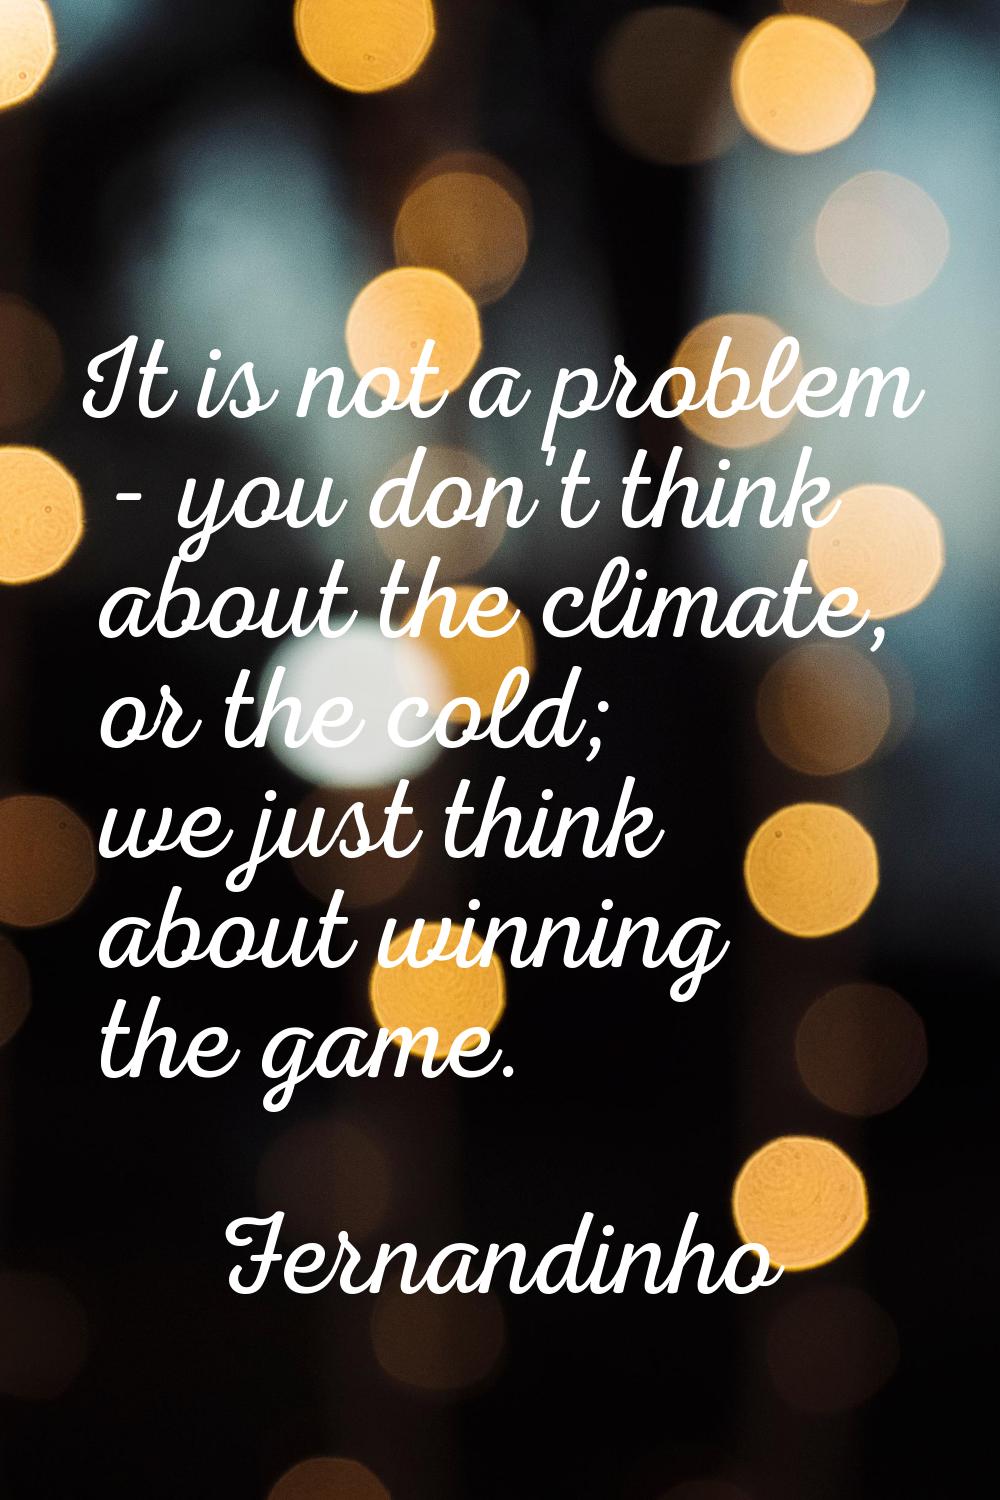 It is not a problem - you don't think about the climate, or the cold; we just think about winning t